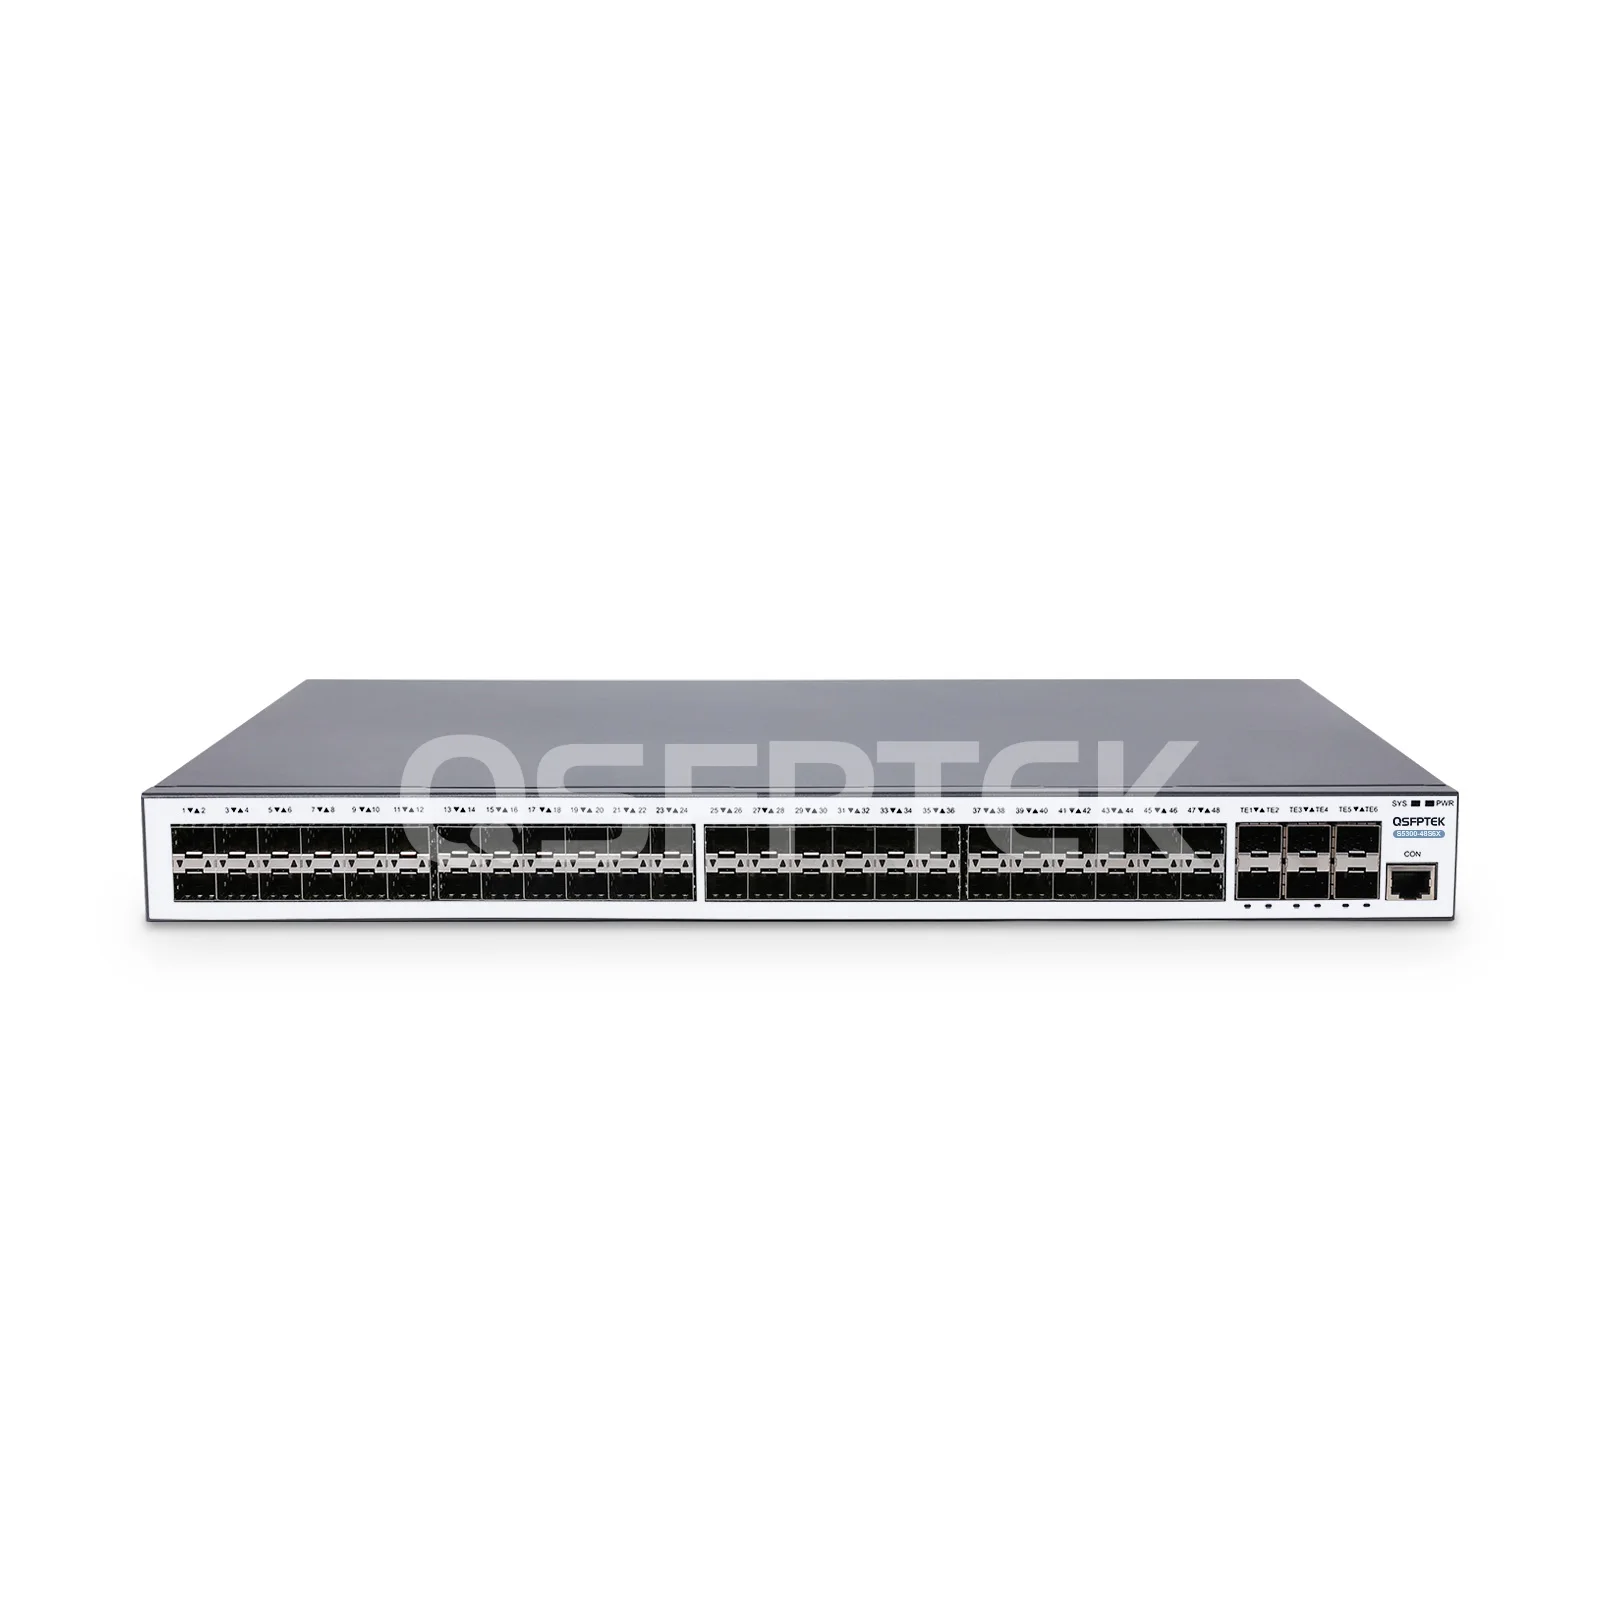 S7600-48X8C, 48-Port 10Gb Ethernet L3+ Managed Switch, with 100G